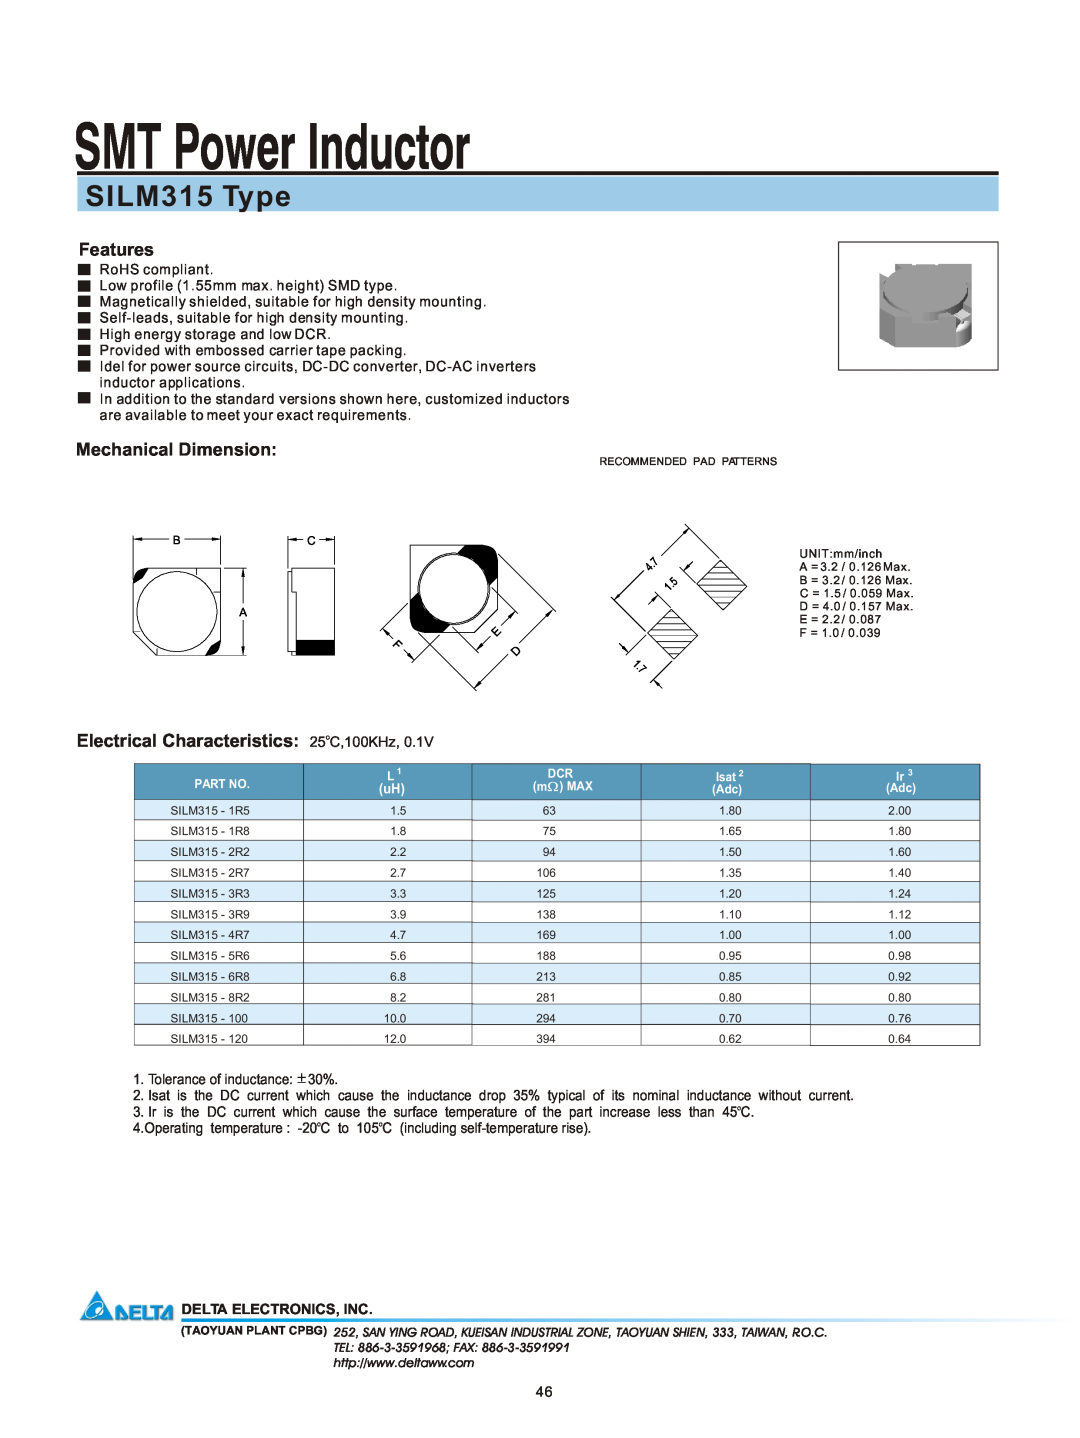 Delta Electronics manual SMT Power Inductor, SILM315 Type, Features, Mechanical Dimension, Delta Electronics, Inc 